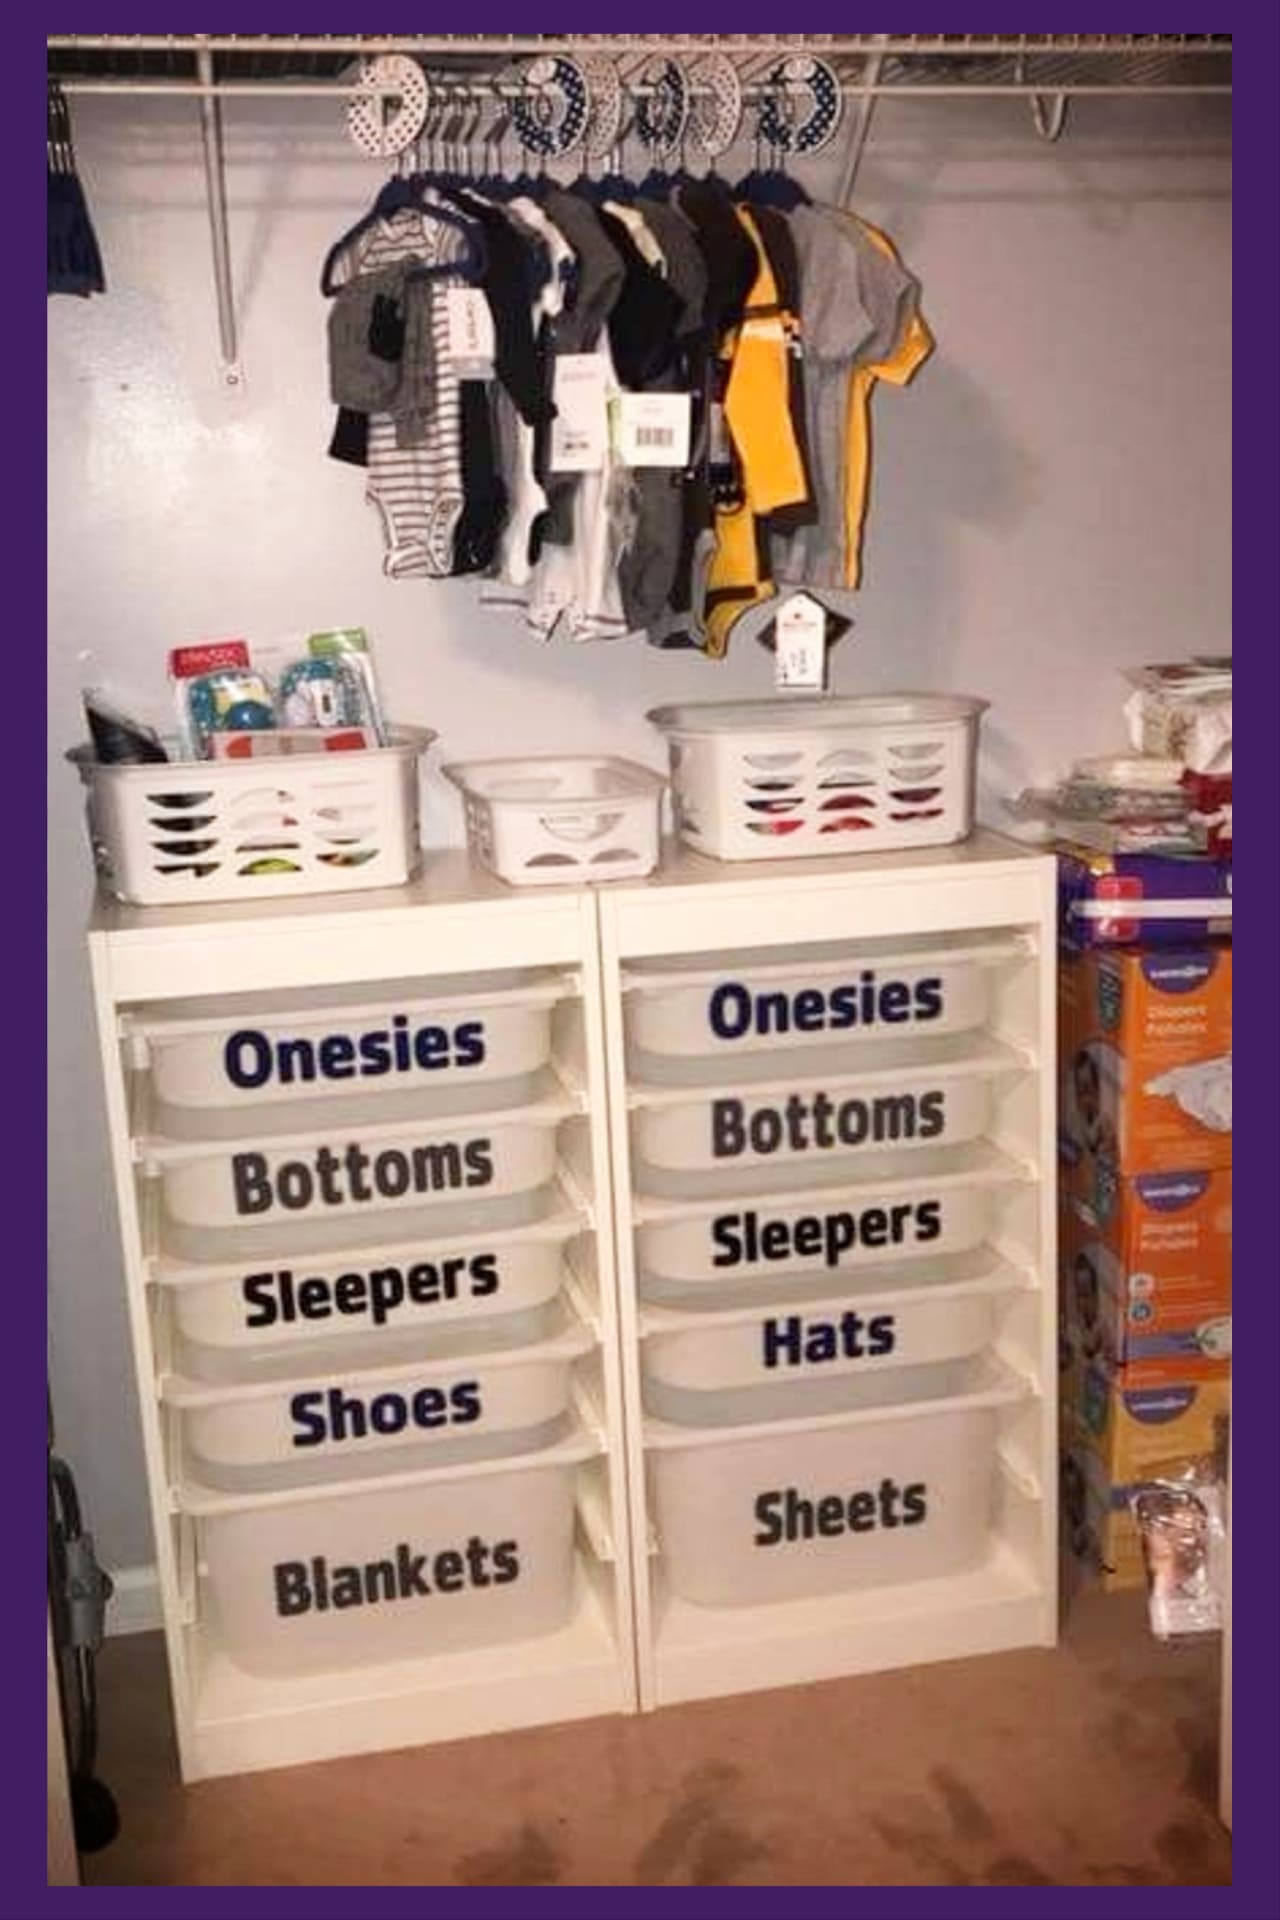 Baby clothes organization ideas for organizing baby clothes in the nursery closet - smart organization ideas for the home